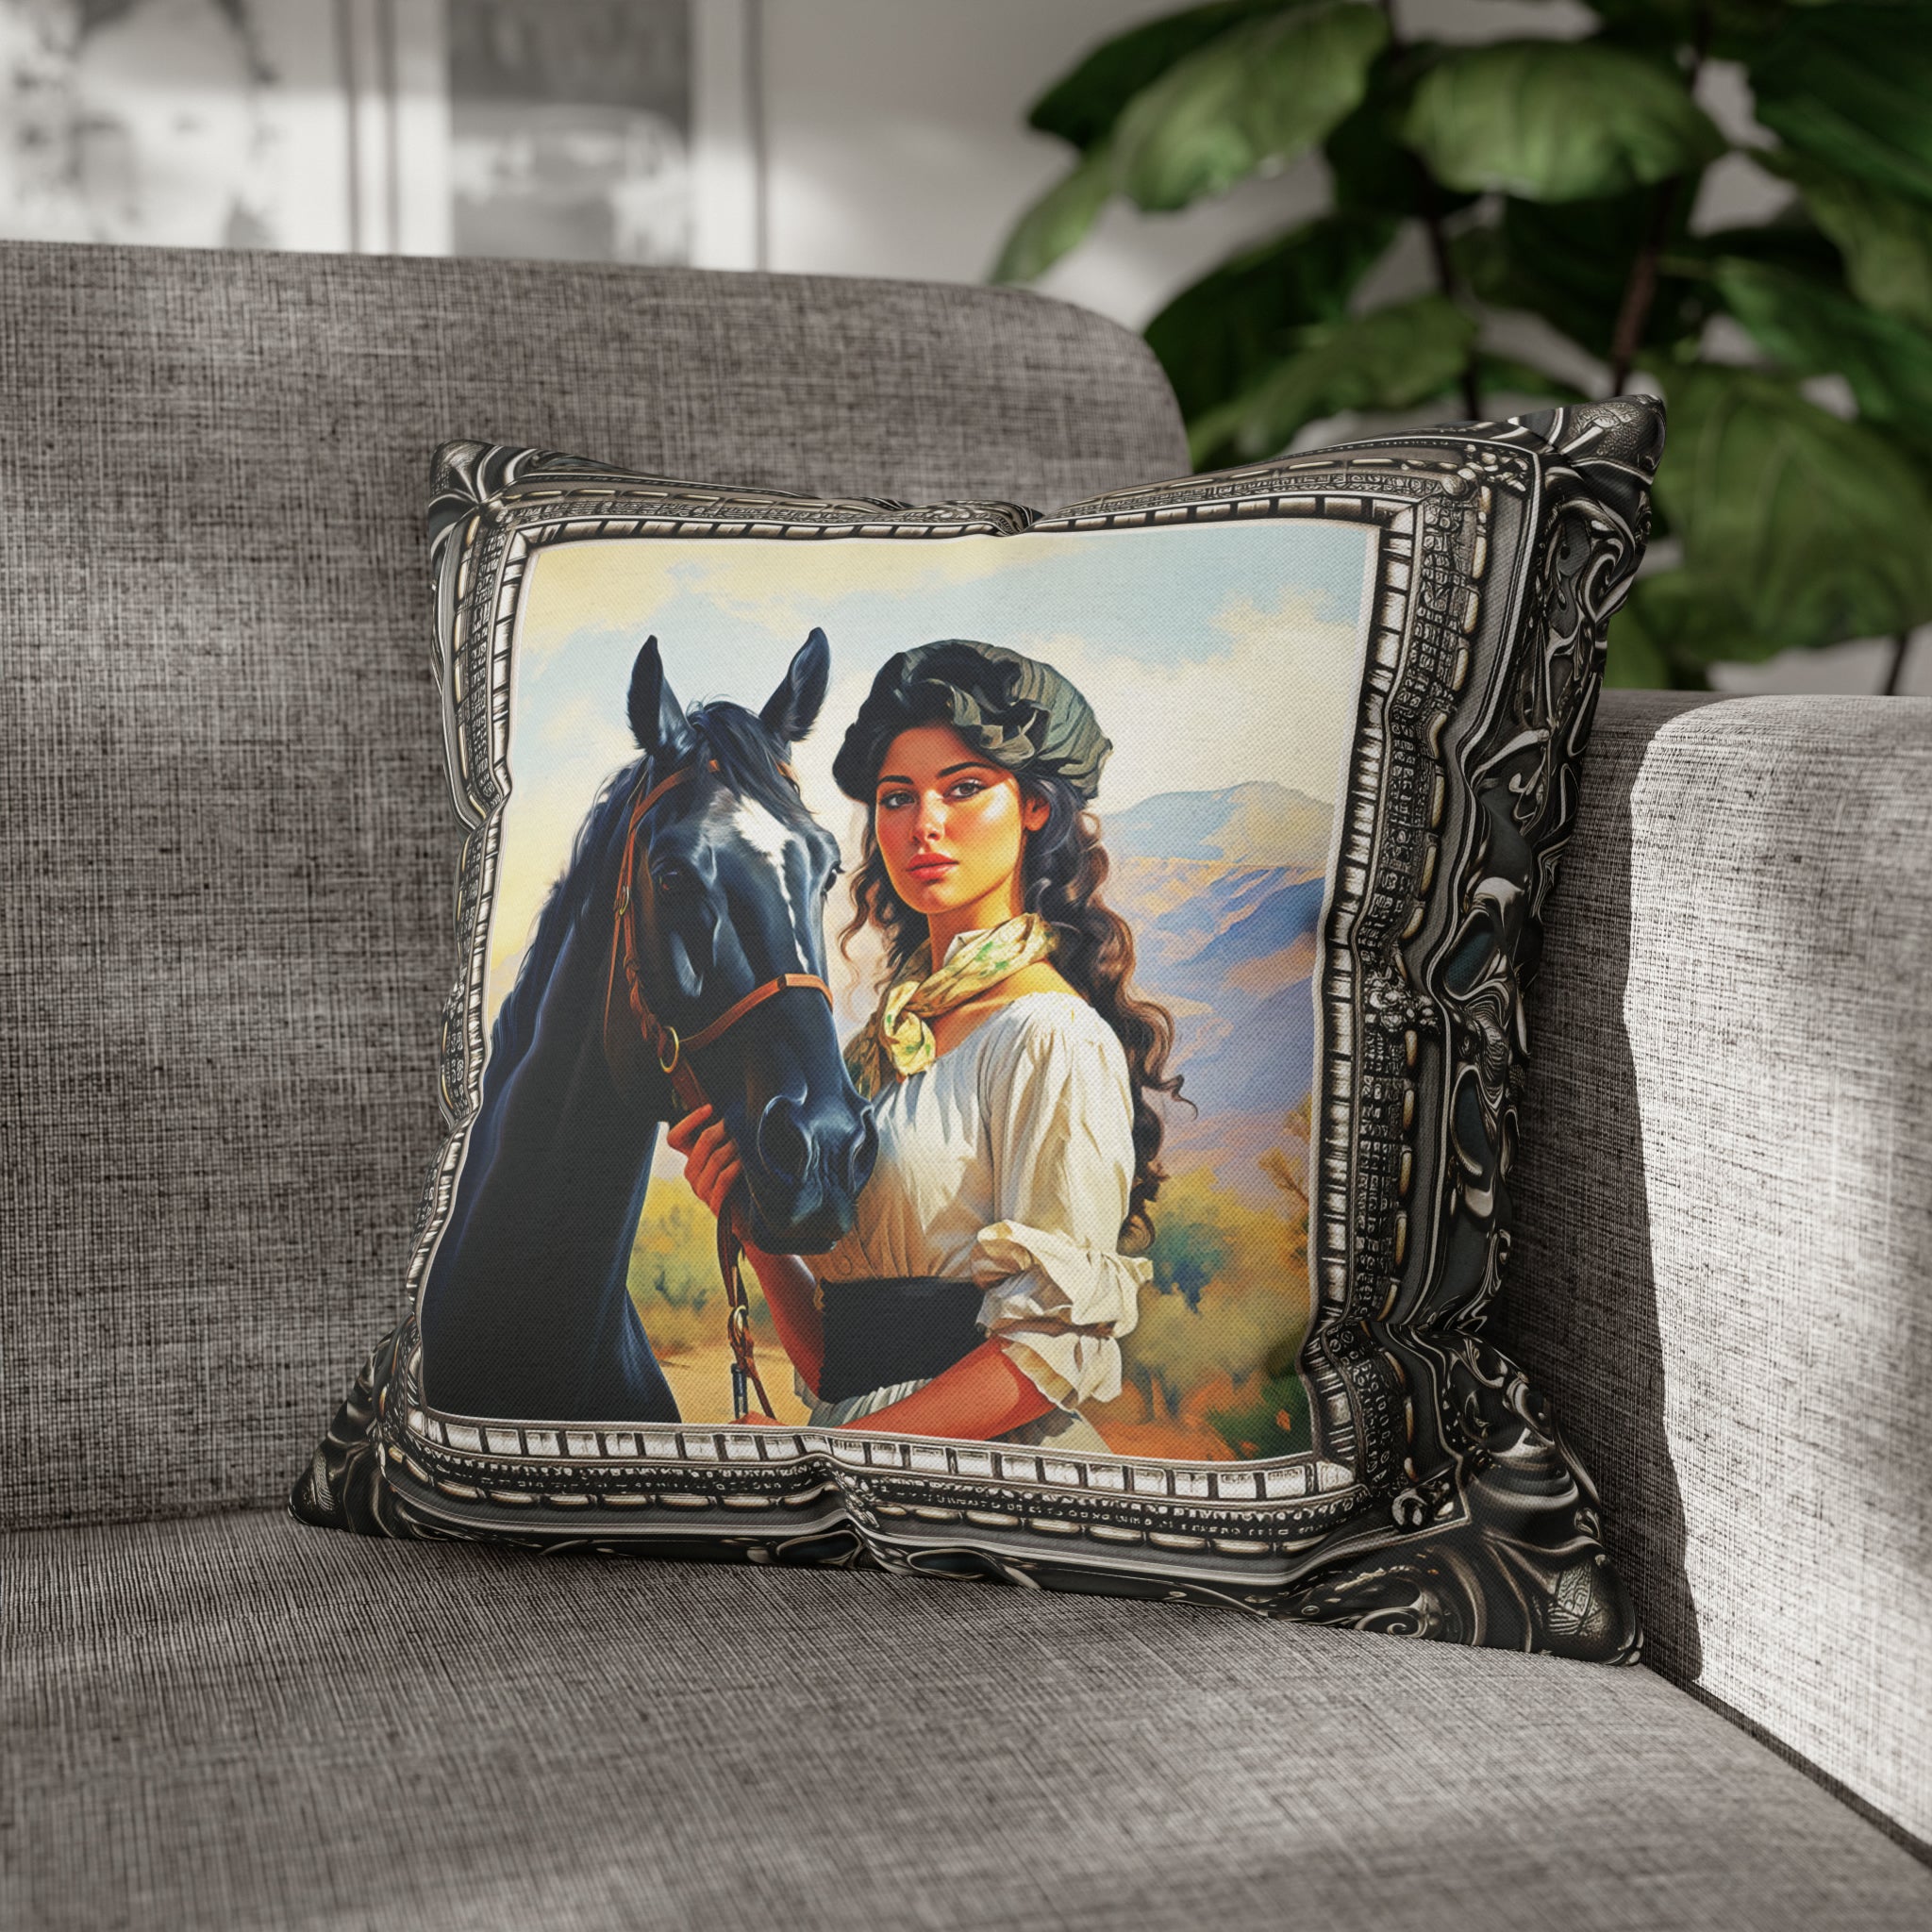 Square Pillow Case 18" x 18", CASE ONLY, no pillow form, original Art ,a Painting of a Tuscan Woman with Her Horse in the Countryside